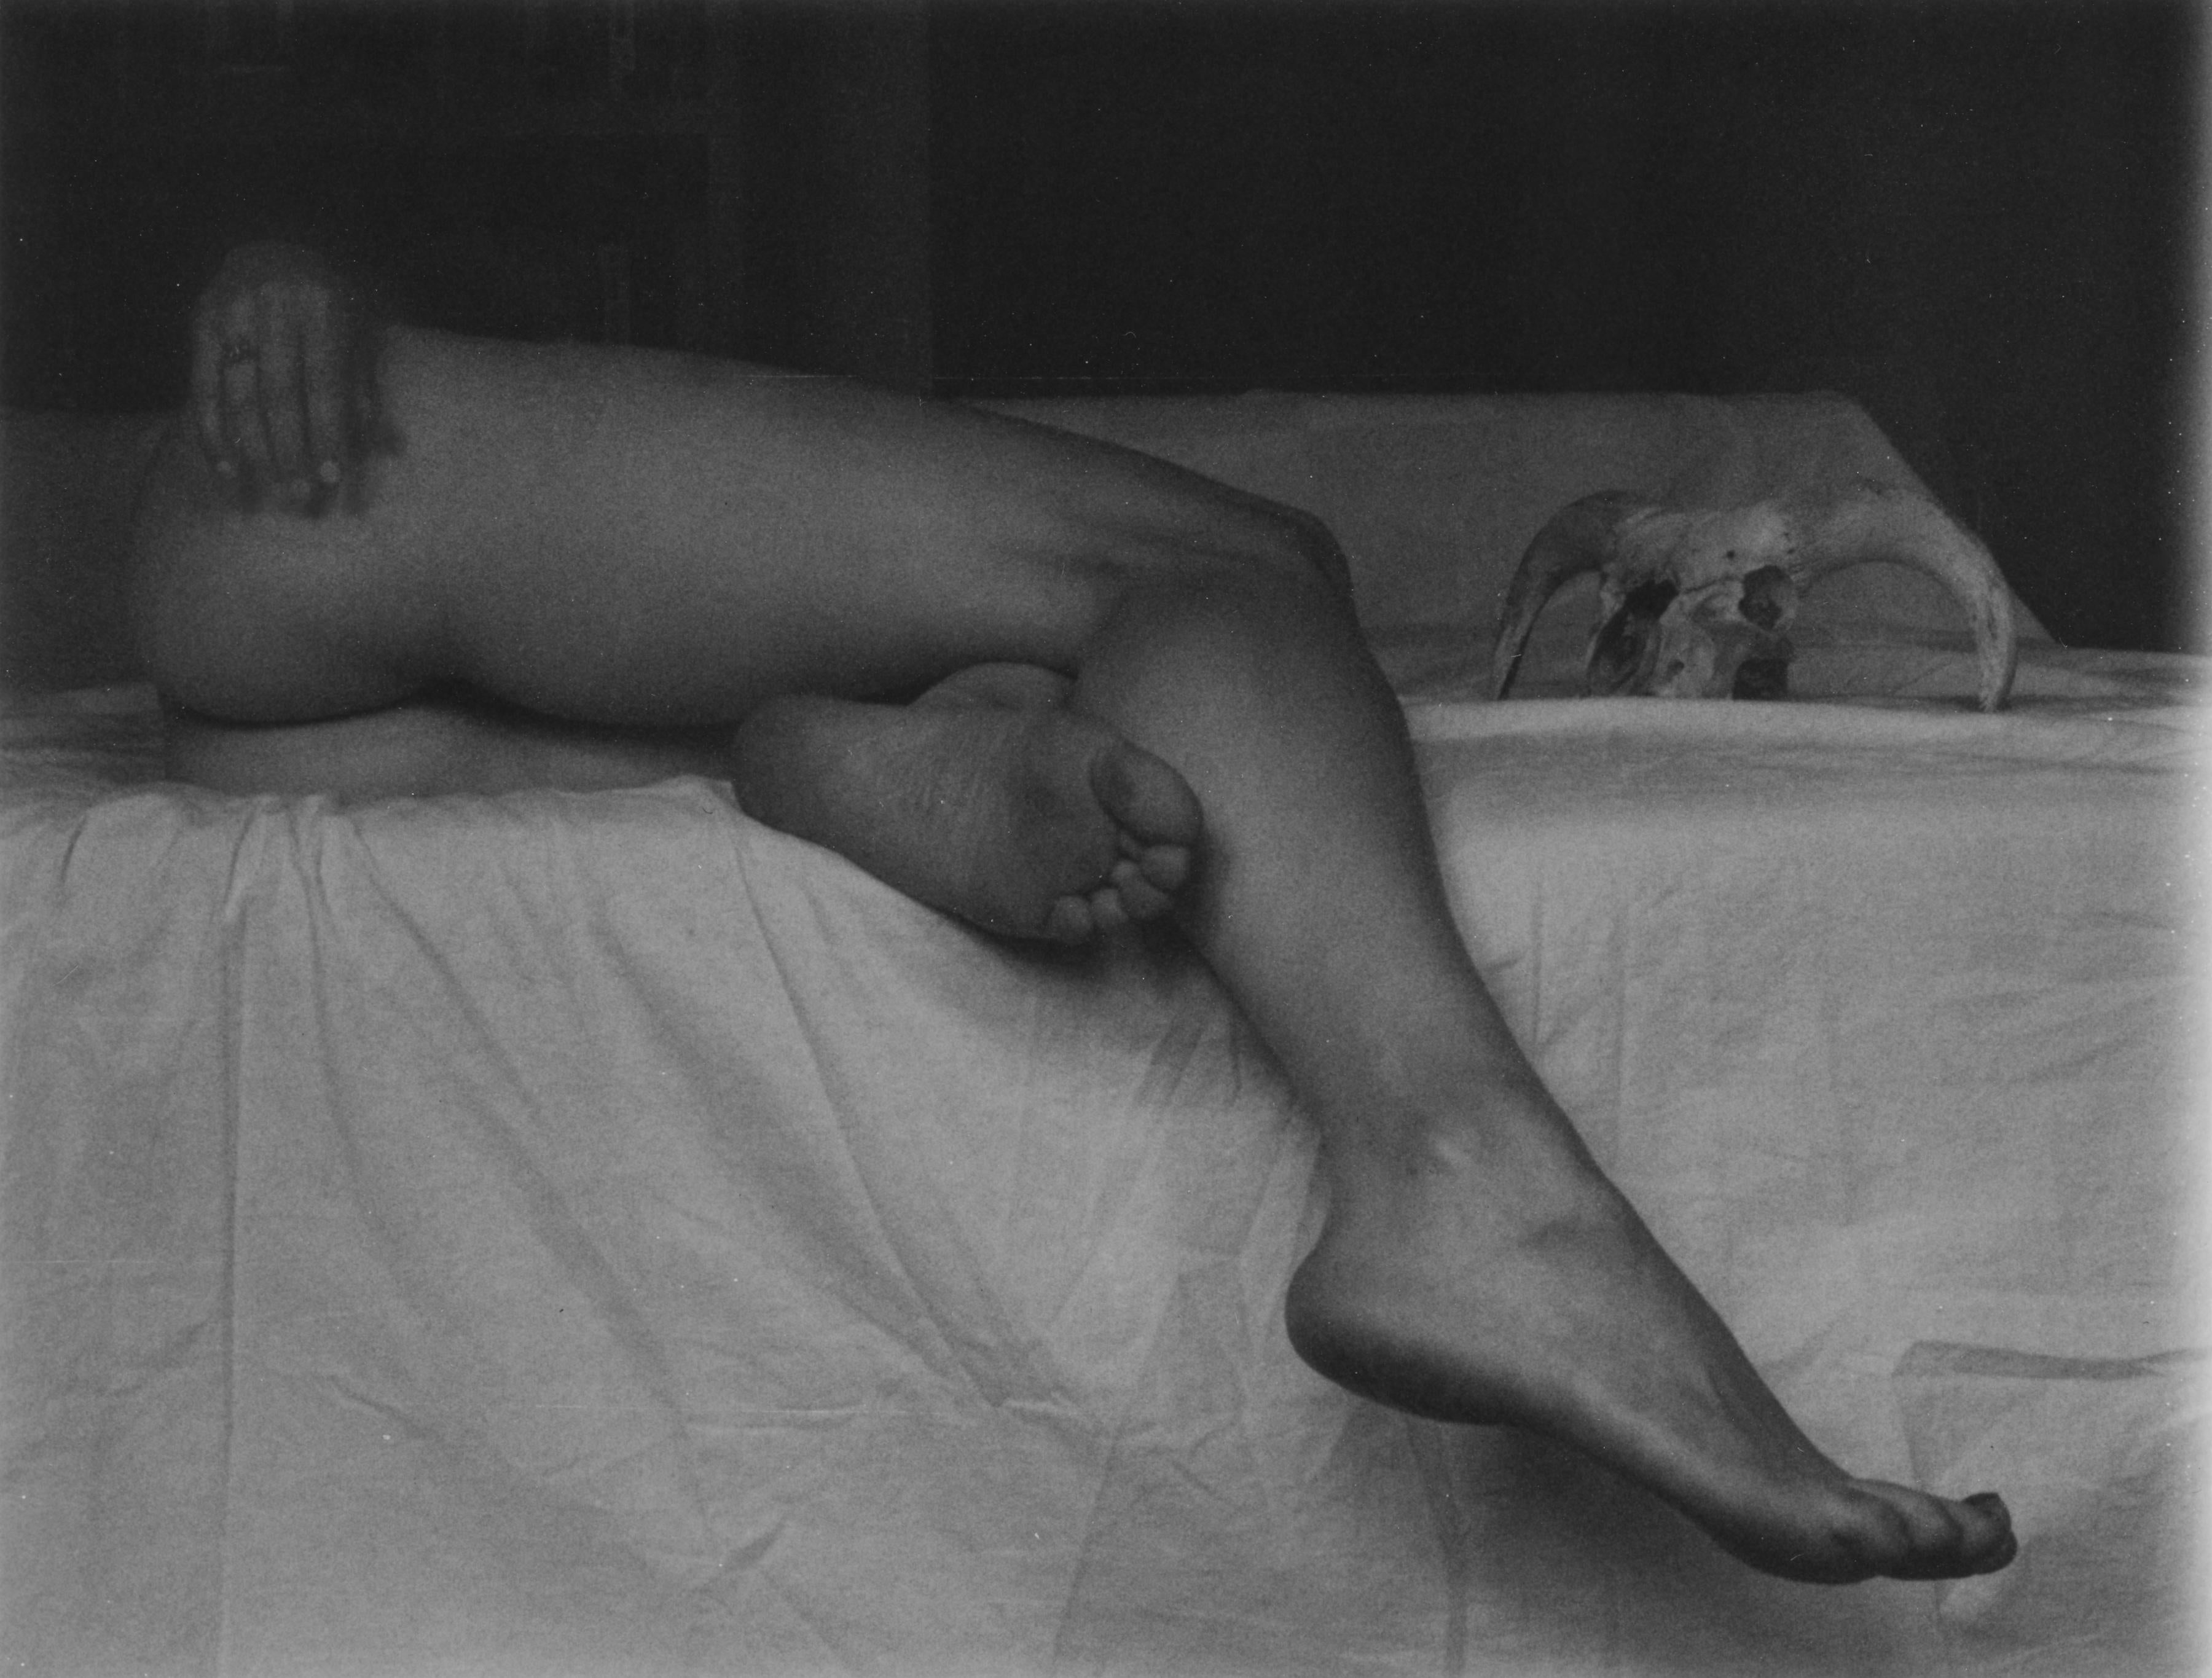 The Departed - 21st Century, Polaroid, Nude Photography, Contemporary